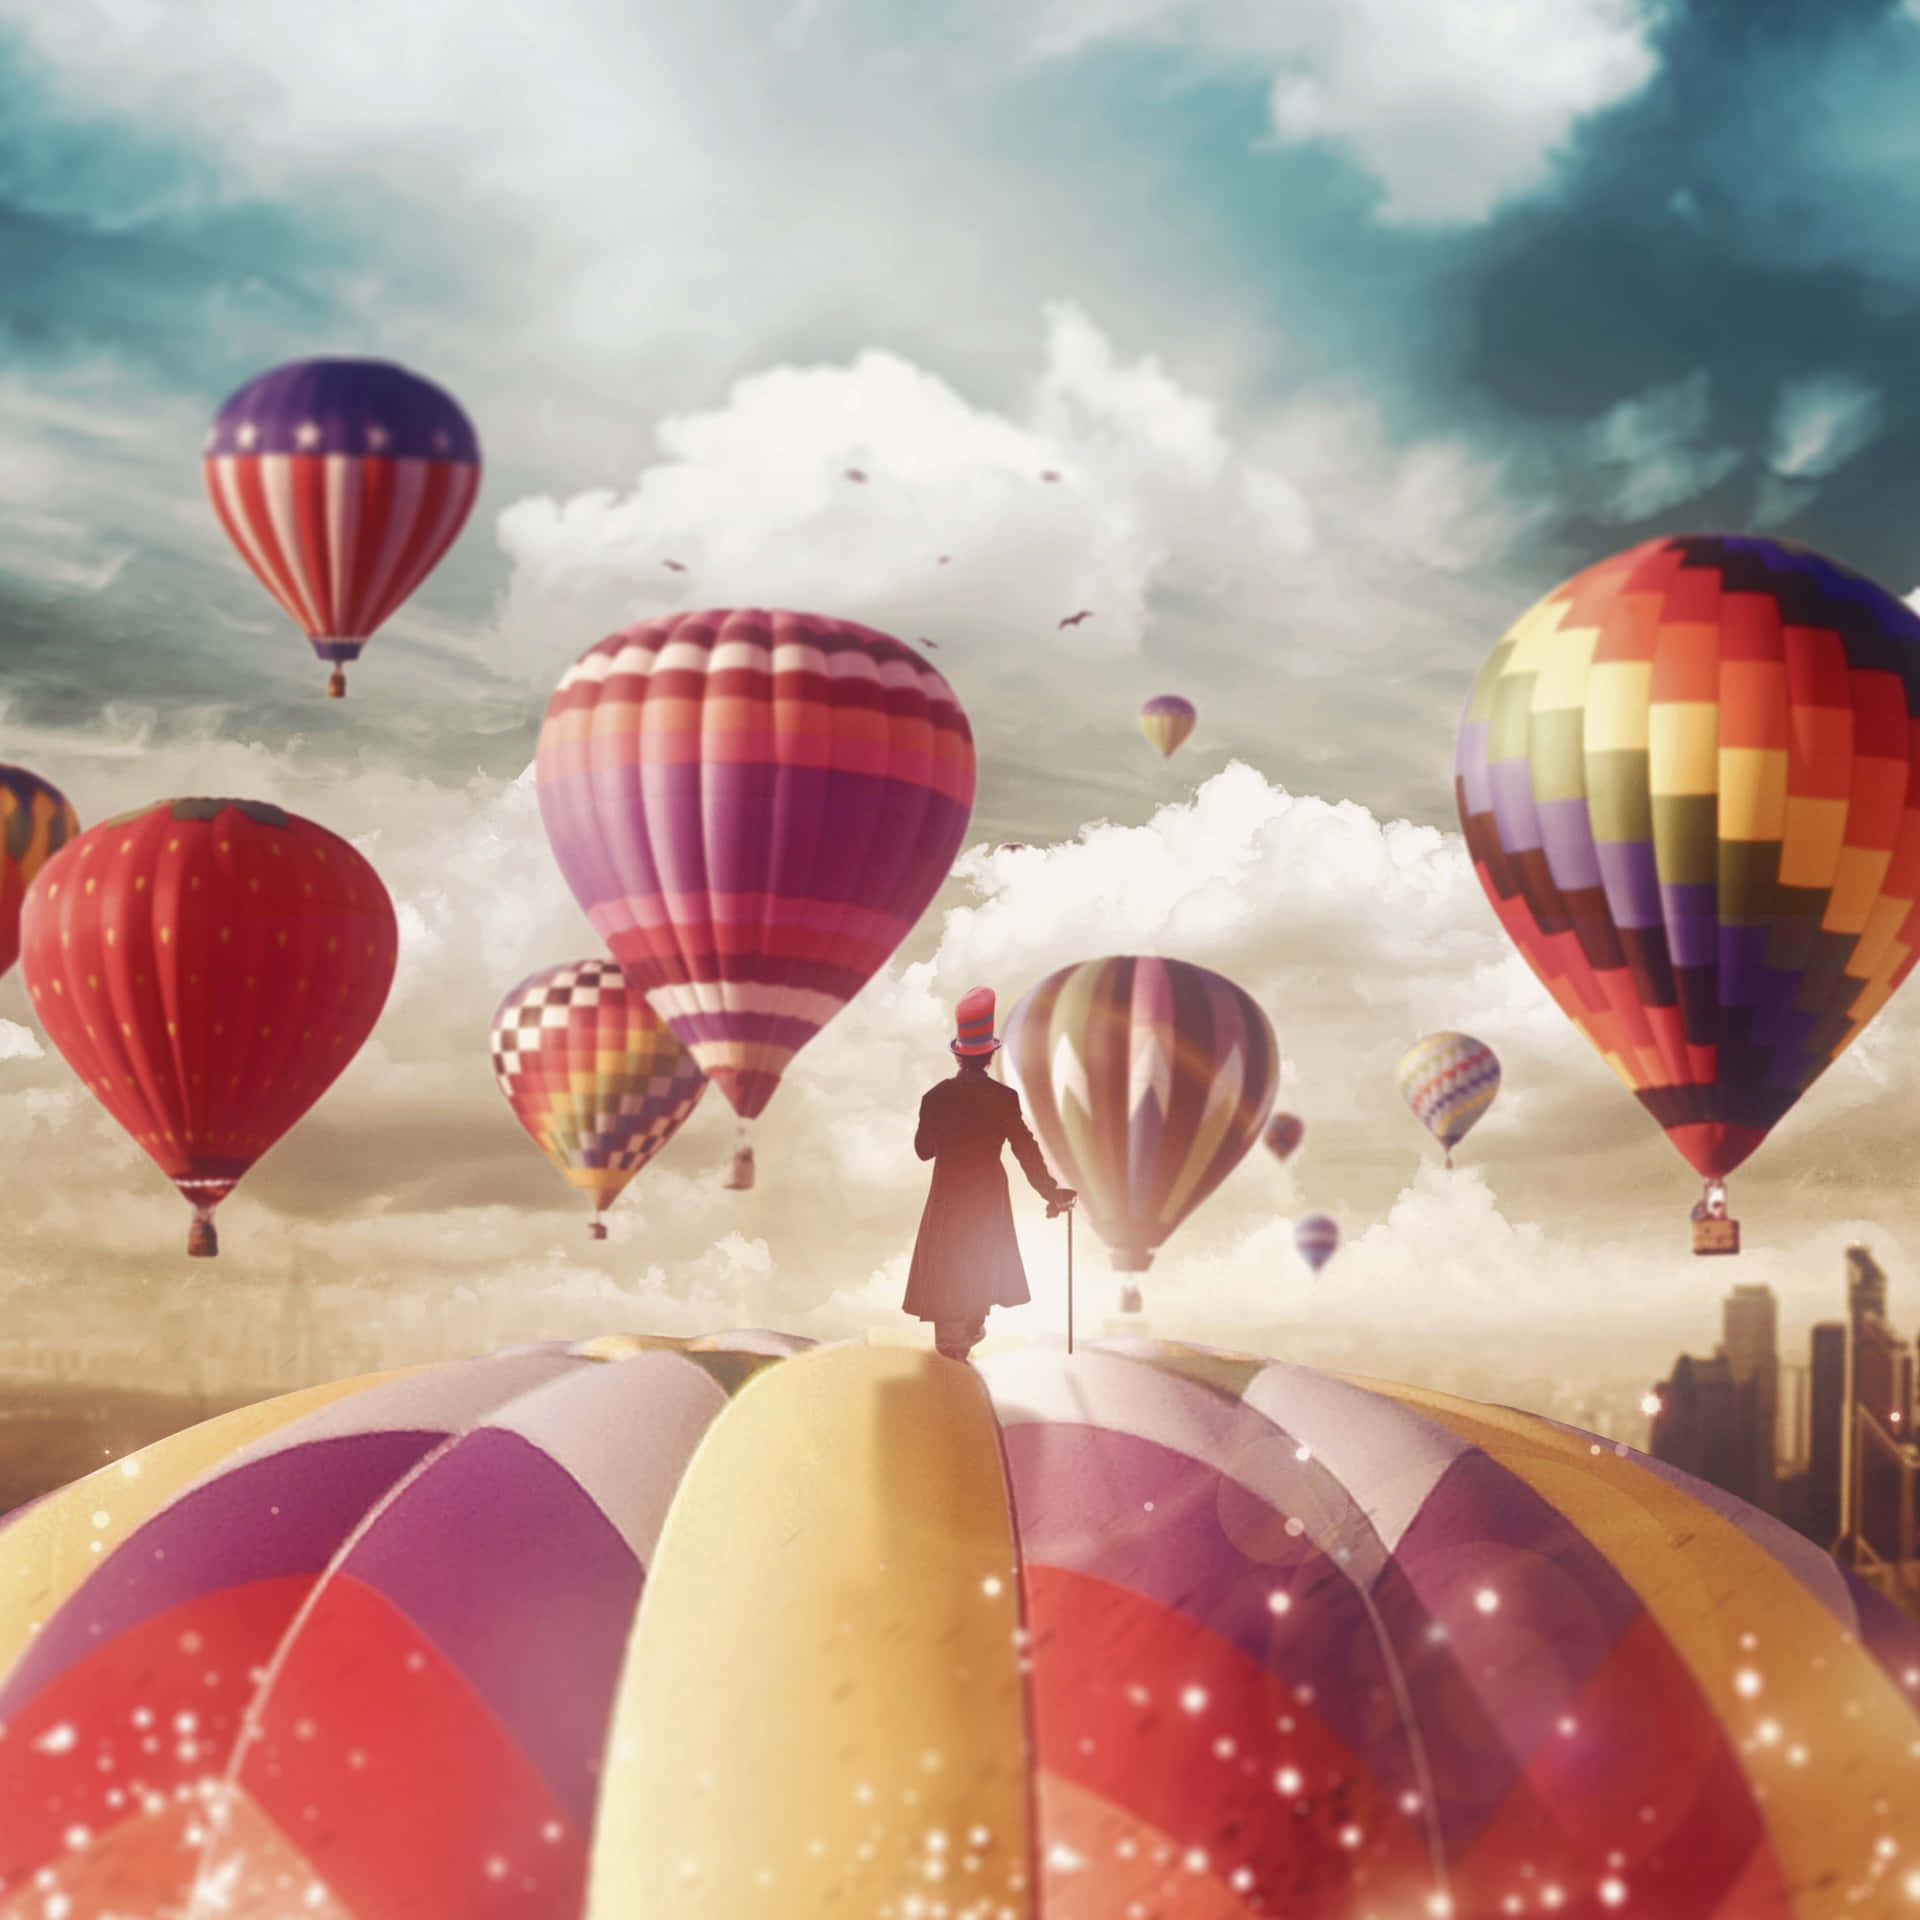 A Breathtaking Journey In The Sky: Hot Air Balloon Ride At Sunset